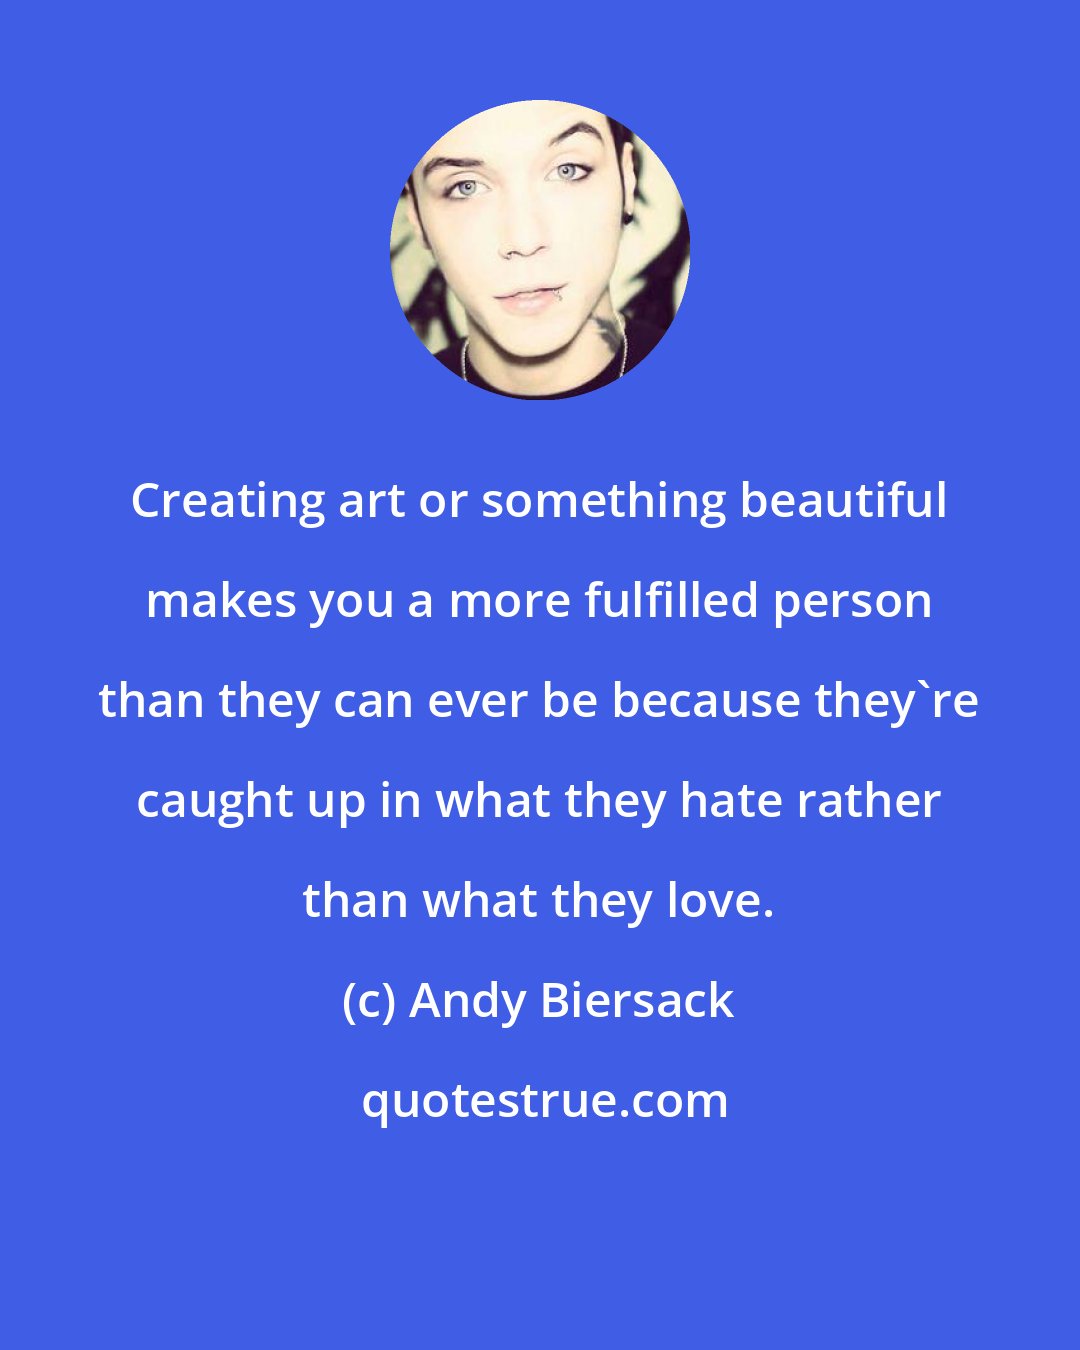 Andy Biersack: Creating art or something beautiful makes you a more fulfilled person than they can ever be because they're caught up in what they hate rather than what they love.